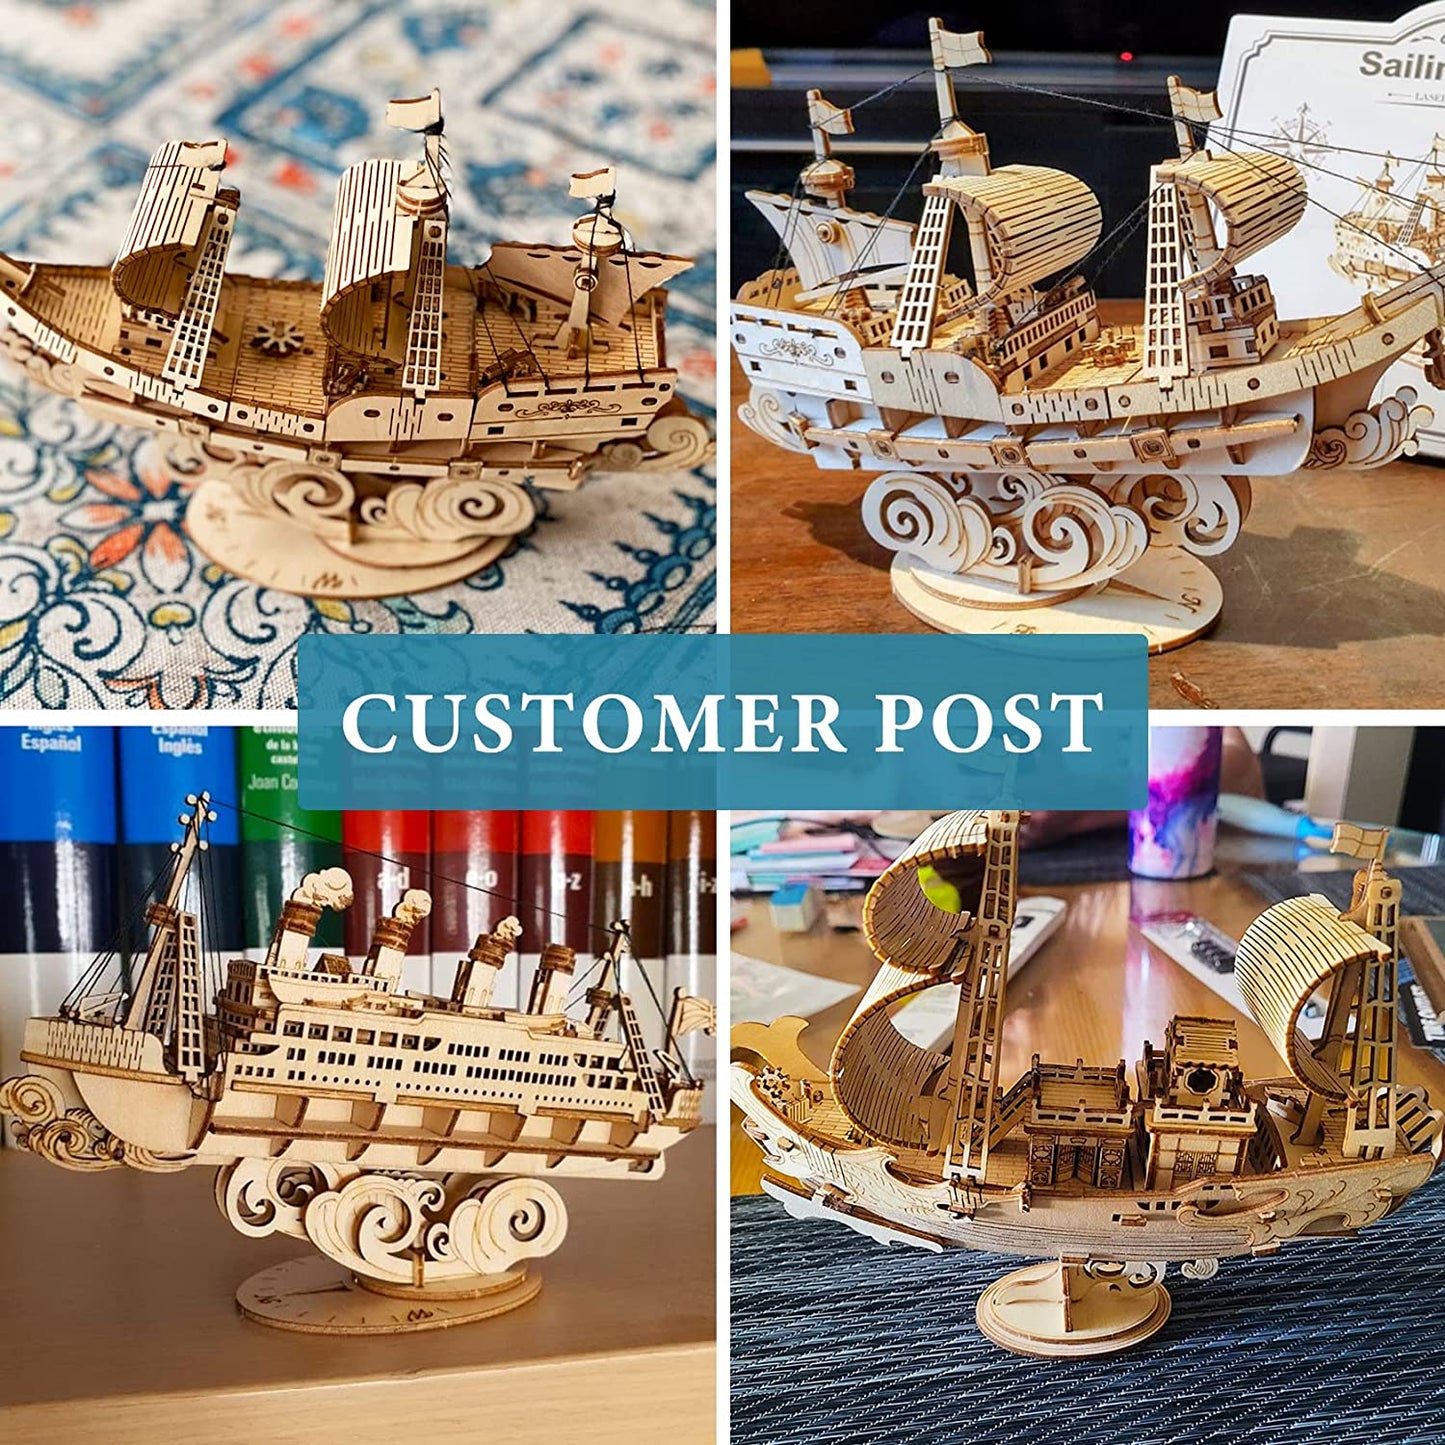 3D Wooden Puzzle for Adults, Vintage Wooden Watercraft Model Kit to Build, Best Gift Ideas - Sailling Ship